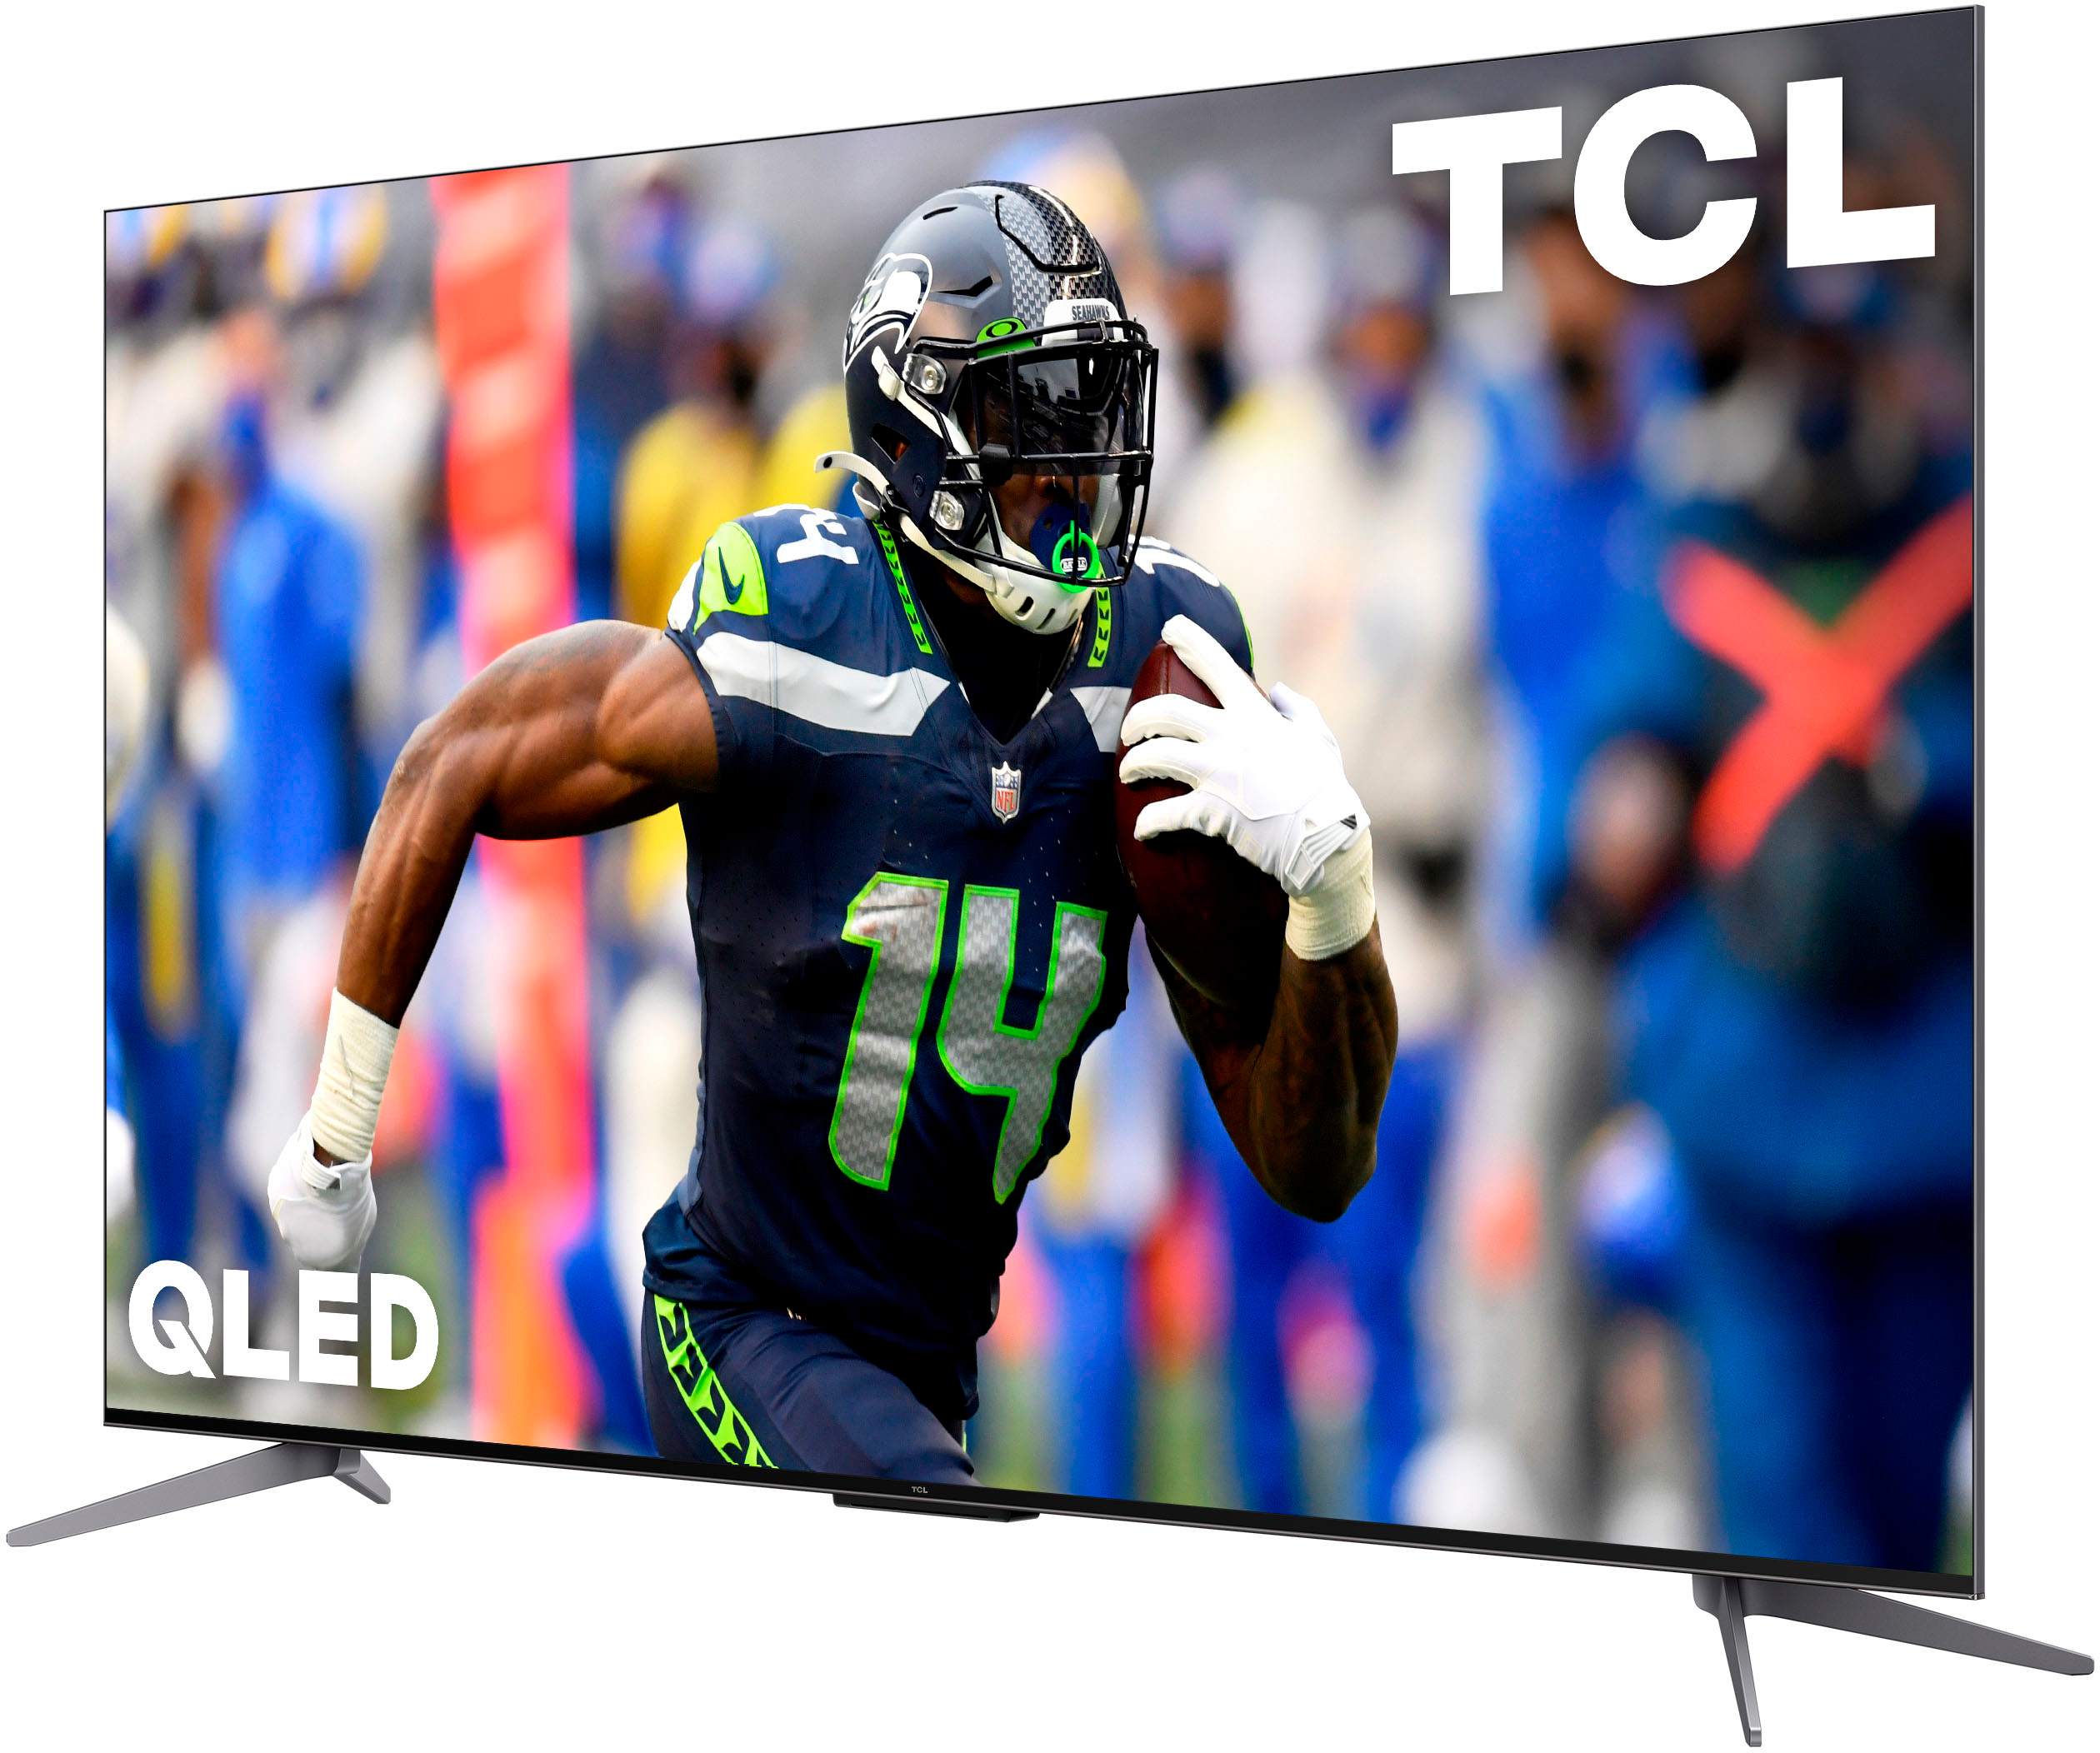 Left View: TCL - 55" Class Q7 Q-Class QLED 4K HDR Smart TV with Google TV